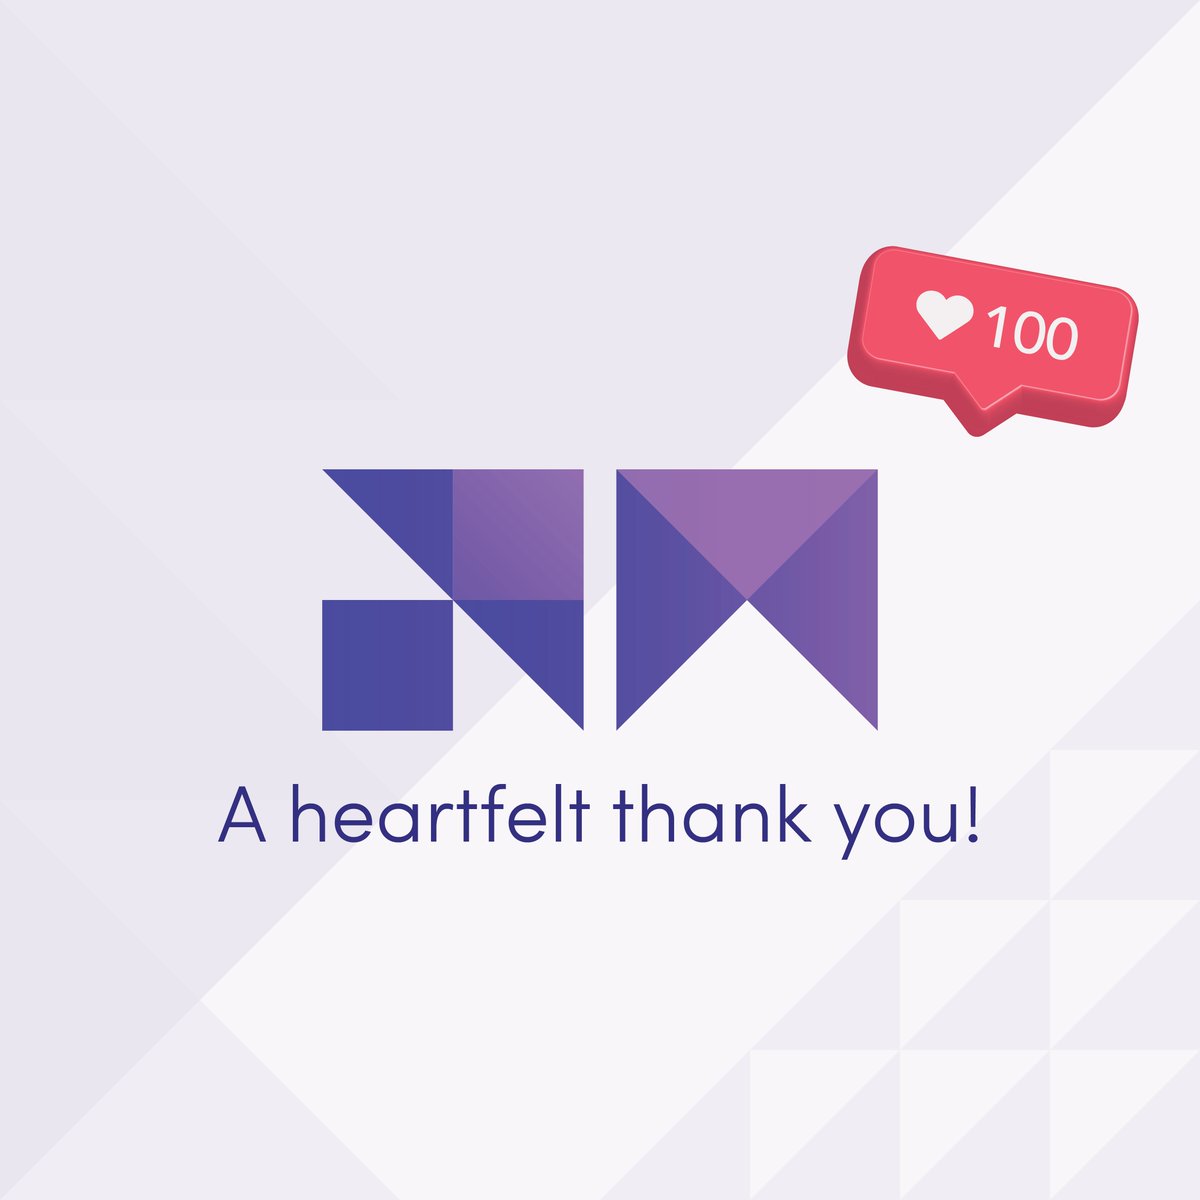 A heartfelt 'thank you' to our amazing clients and dedicated followers! Your support and trust in our journey mean the world to us. Together, we're committed to making great things happen! 🌟 #planetmedia #marketing #advertsing #technology #creative #services #digitalmarketing